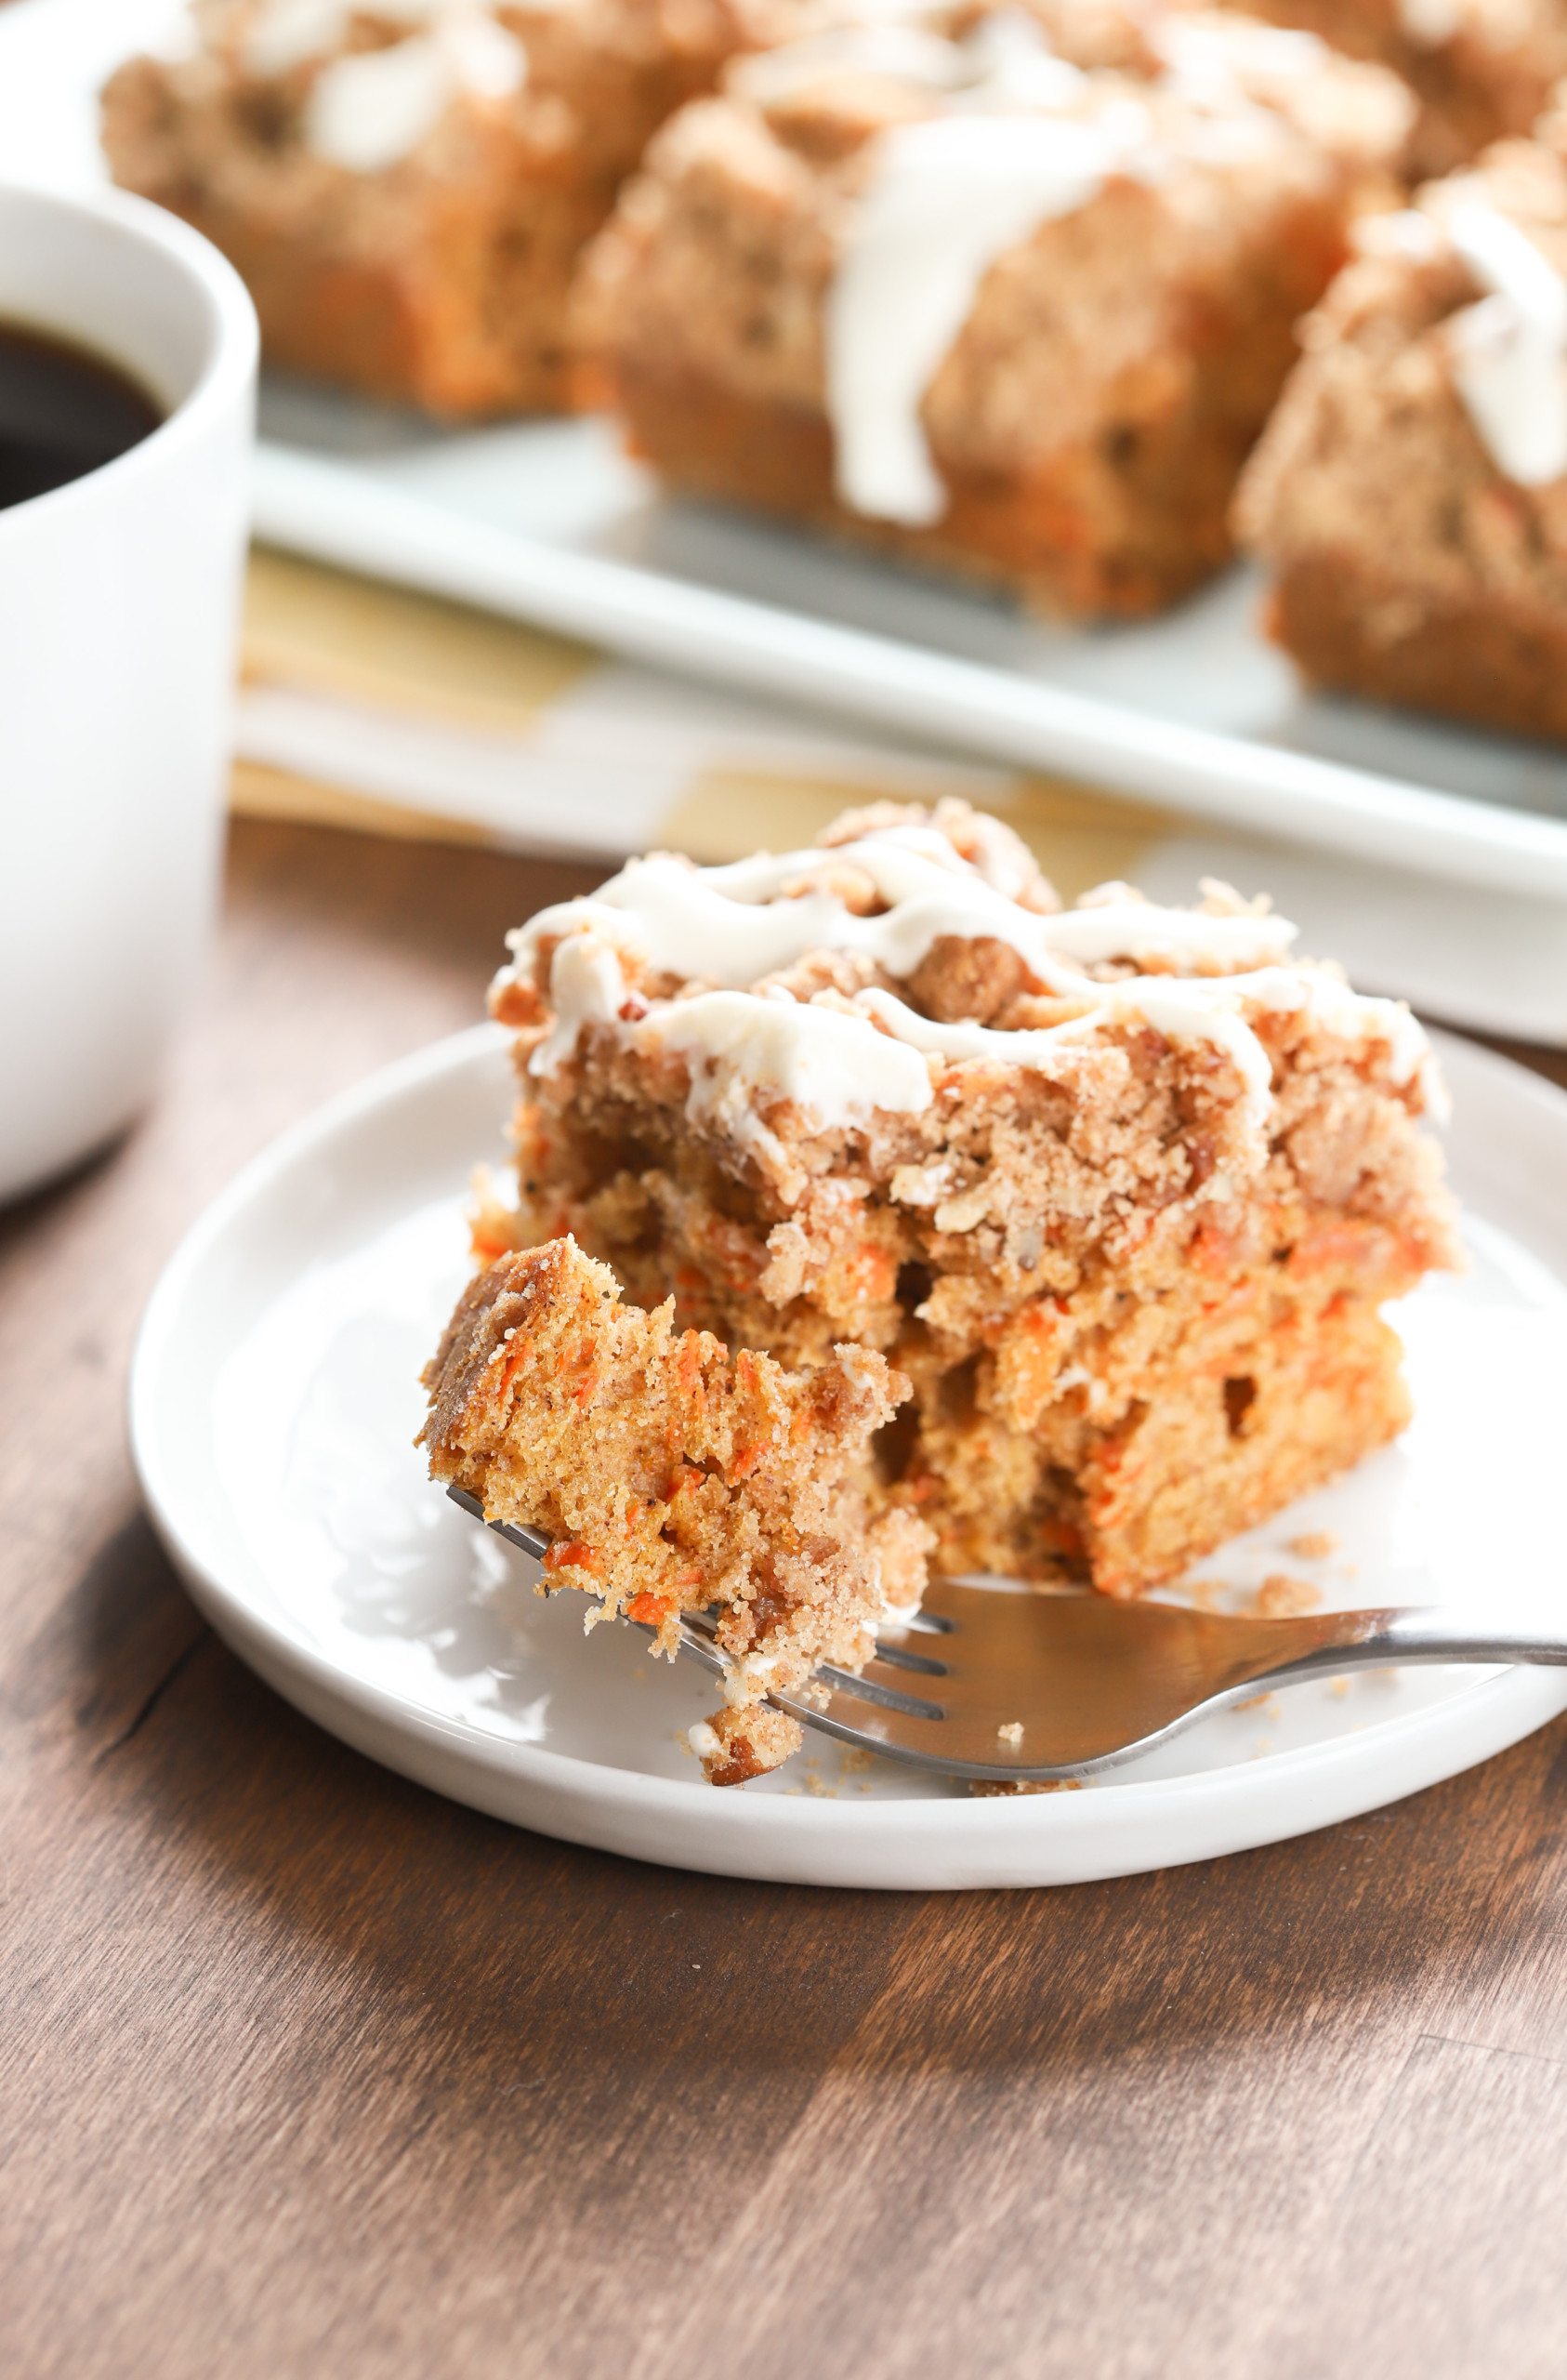 Up close view of a bite of carrot coffee cake on a fork.